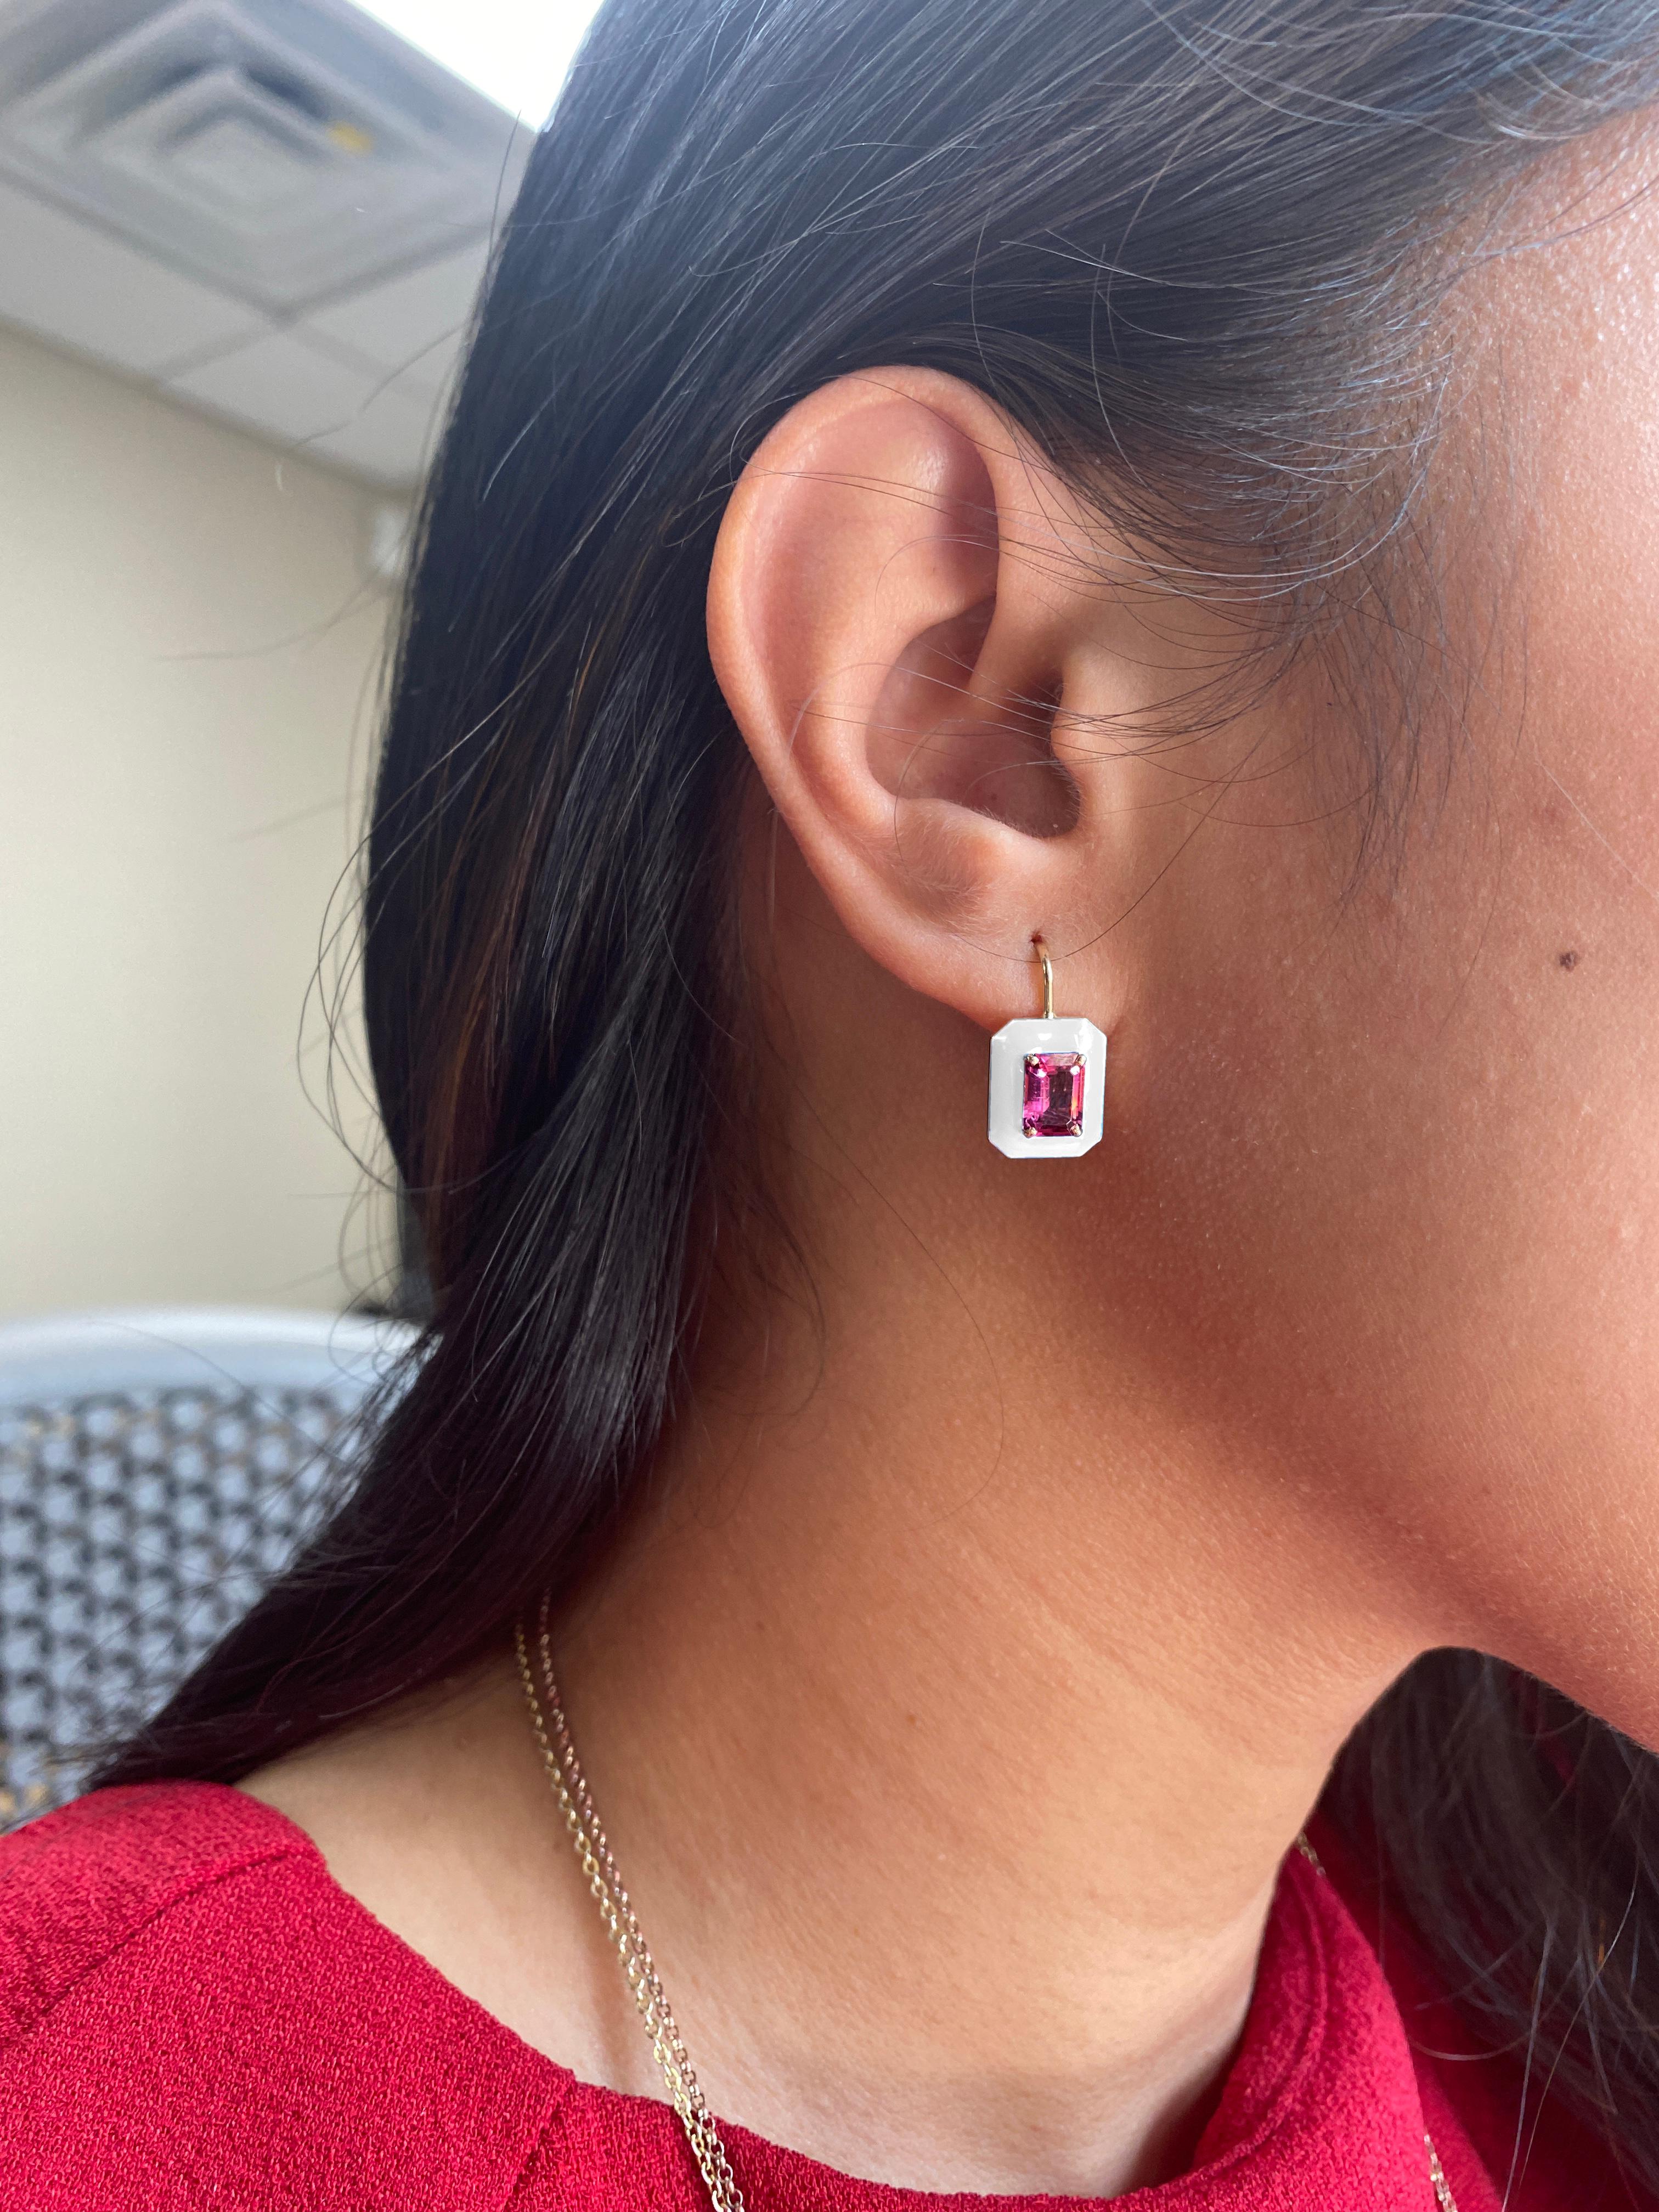 These unique earrings are a Garnet Emerald Cut, with White Enamel border and Lever back. From our ‘Queen’ Collection, it was inspired by royalty, but with a modern twist. The combination of enamel, and Garnet represents power, richness and passion